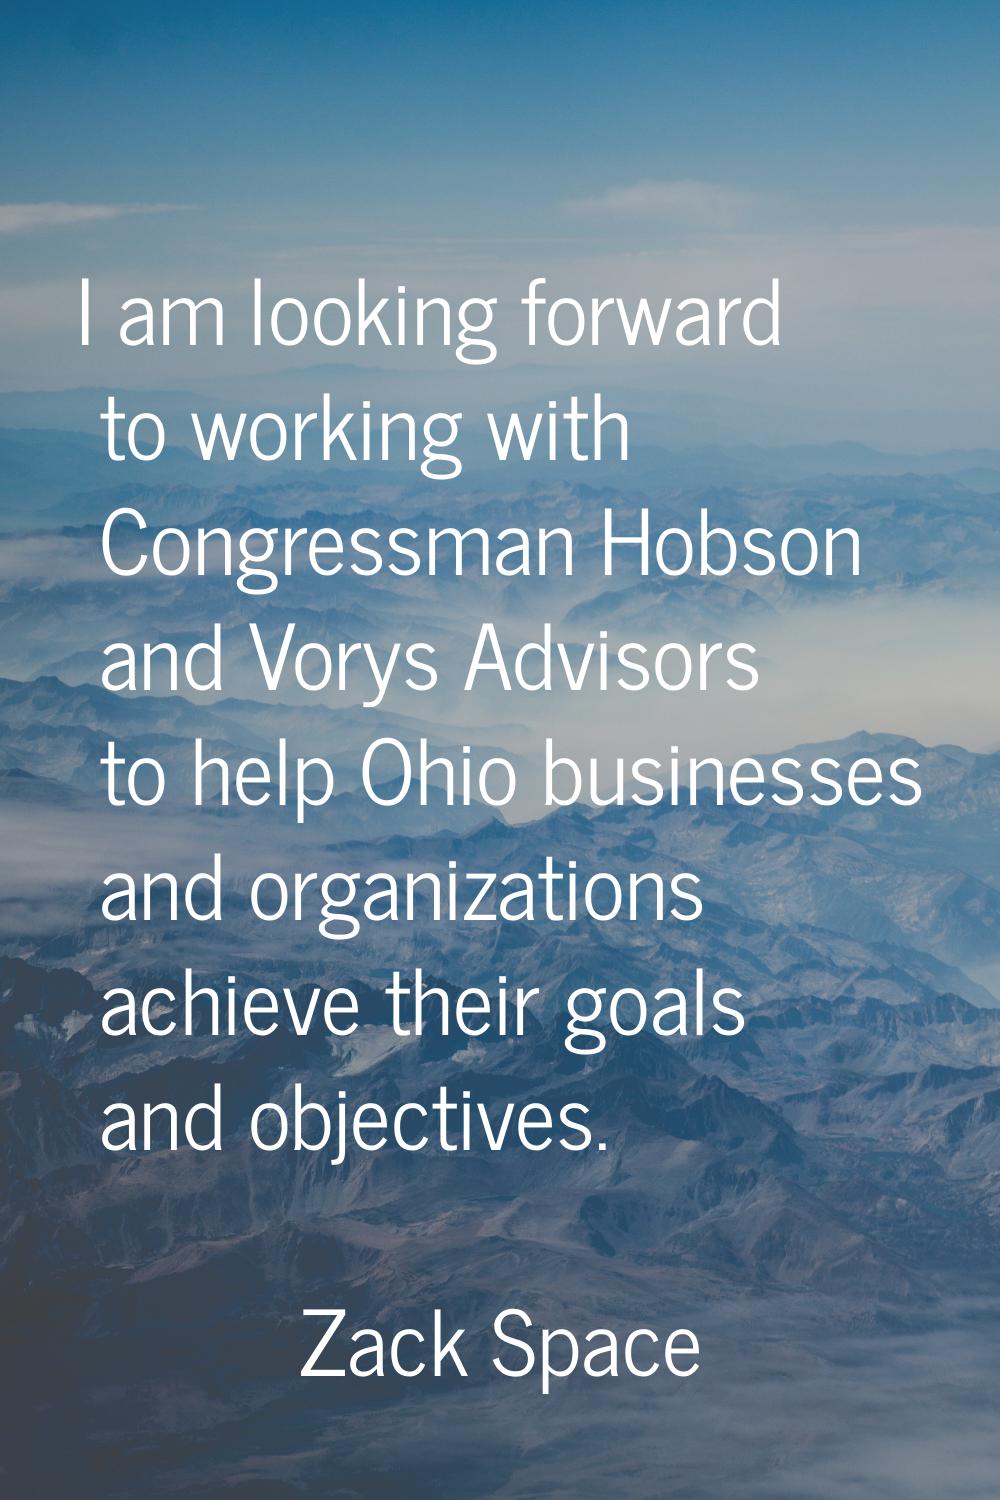 I am looking forward to working with Congressman Hobson and Vorys Advisors to help Ohio businesses 